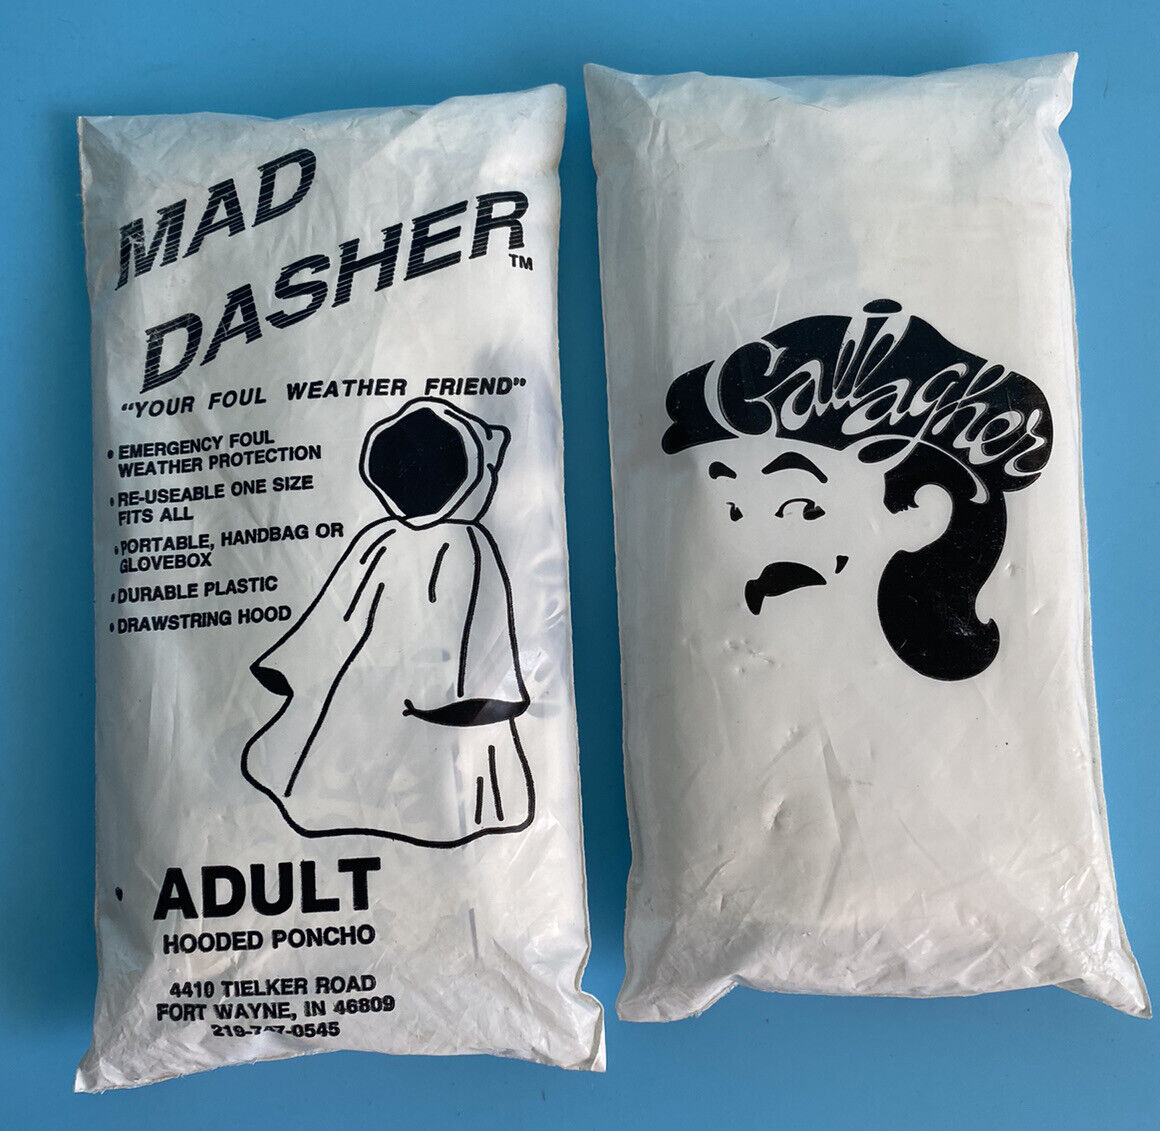 2 NEW GALLAGHER MAD DASHER COLLECTIBLE HOODED PONCHO SOUVENIR COMEDIAN SEALED  Без бренда